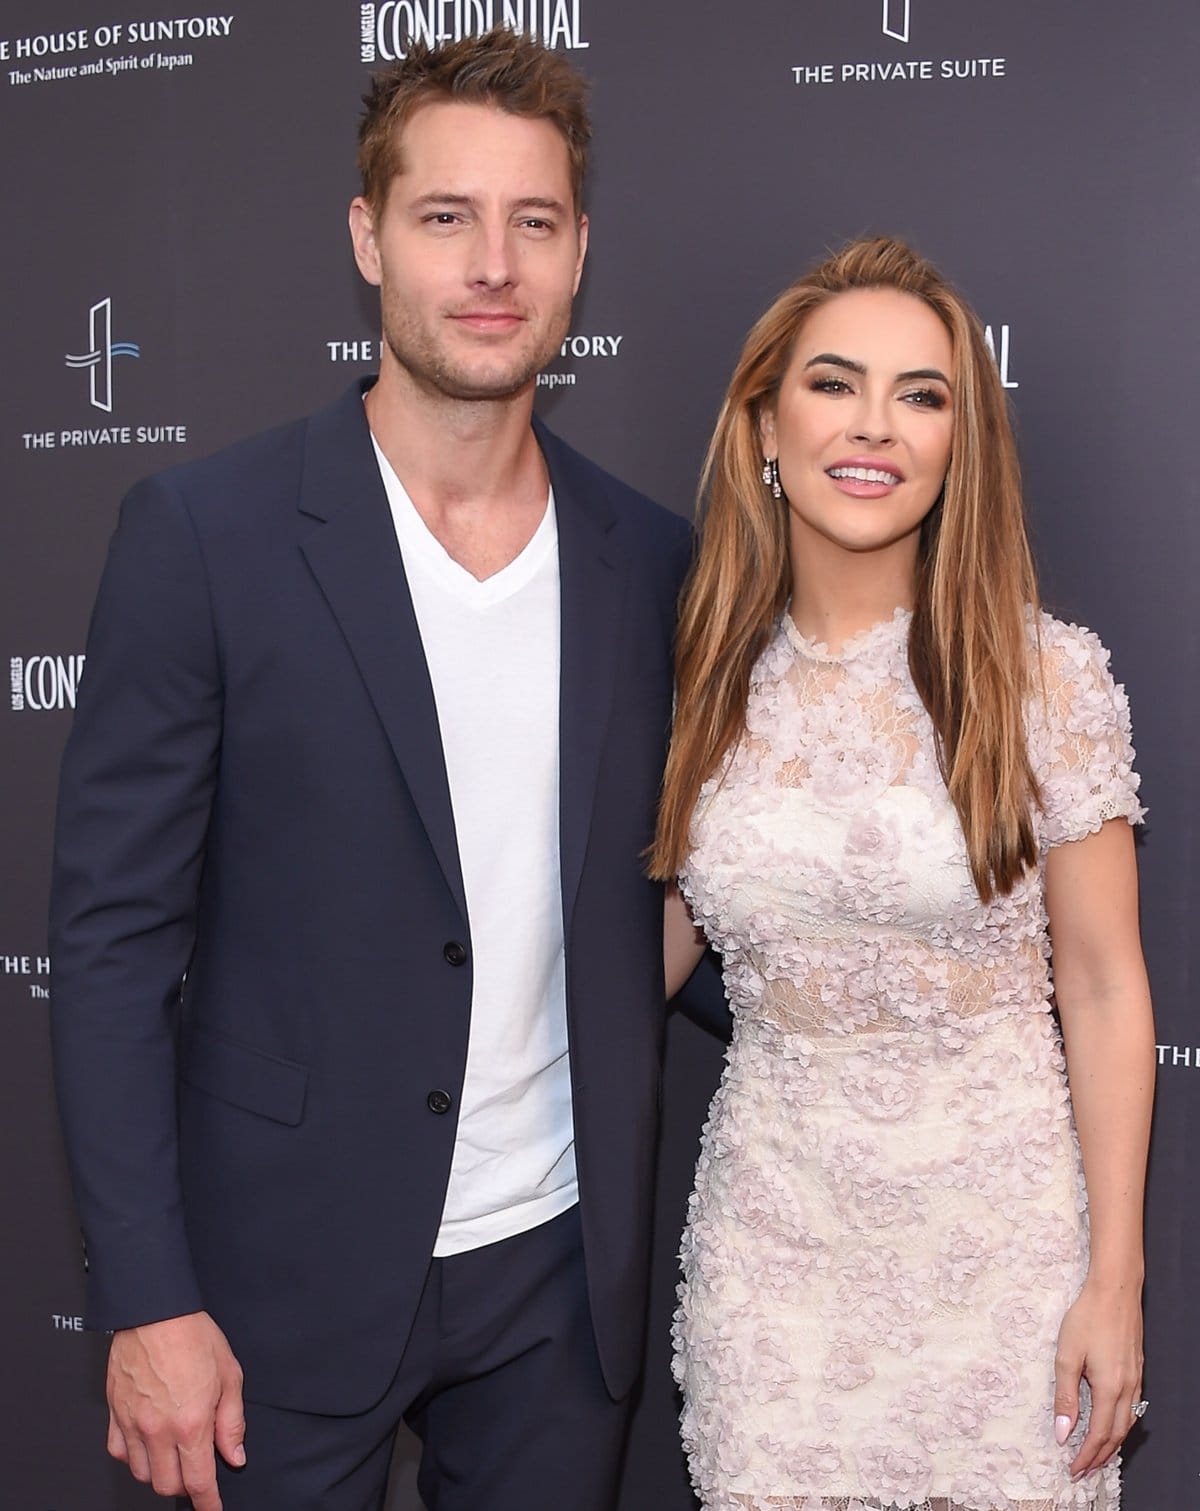 Justin Hartley and Chrishell Stause finalized their divorce in February 2021, almost a year and a half after he filed to end their marriage